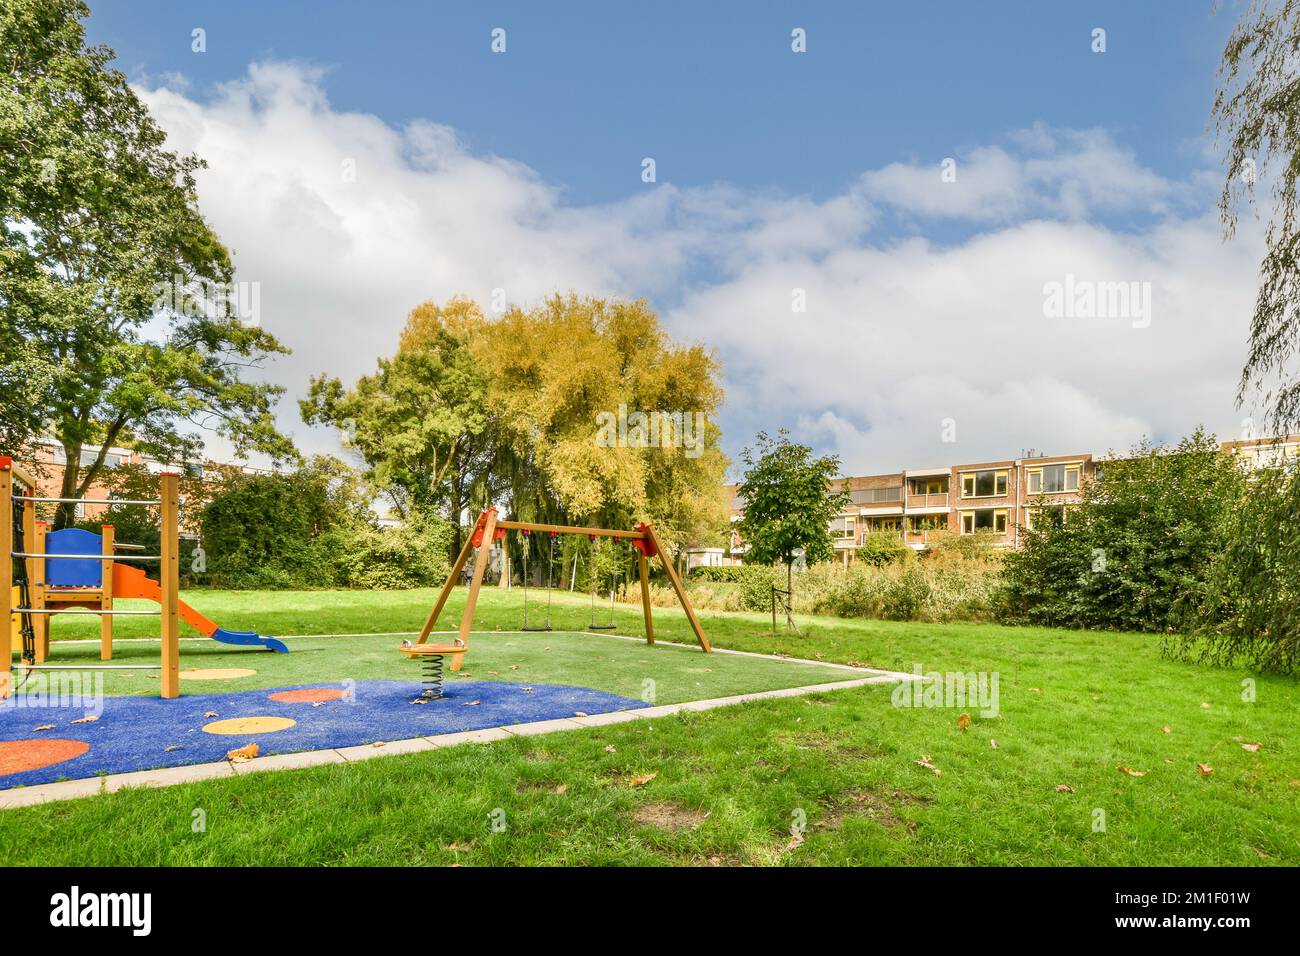 an outdoor play area with swings, slides and climbing equipment in the background is a blue sky filled with white clouds Stock Photo